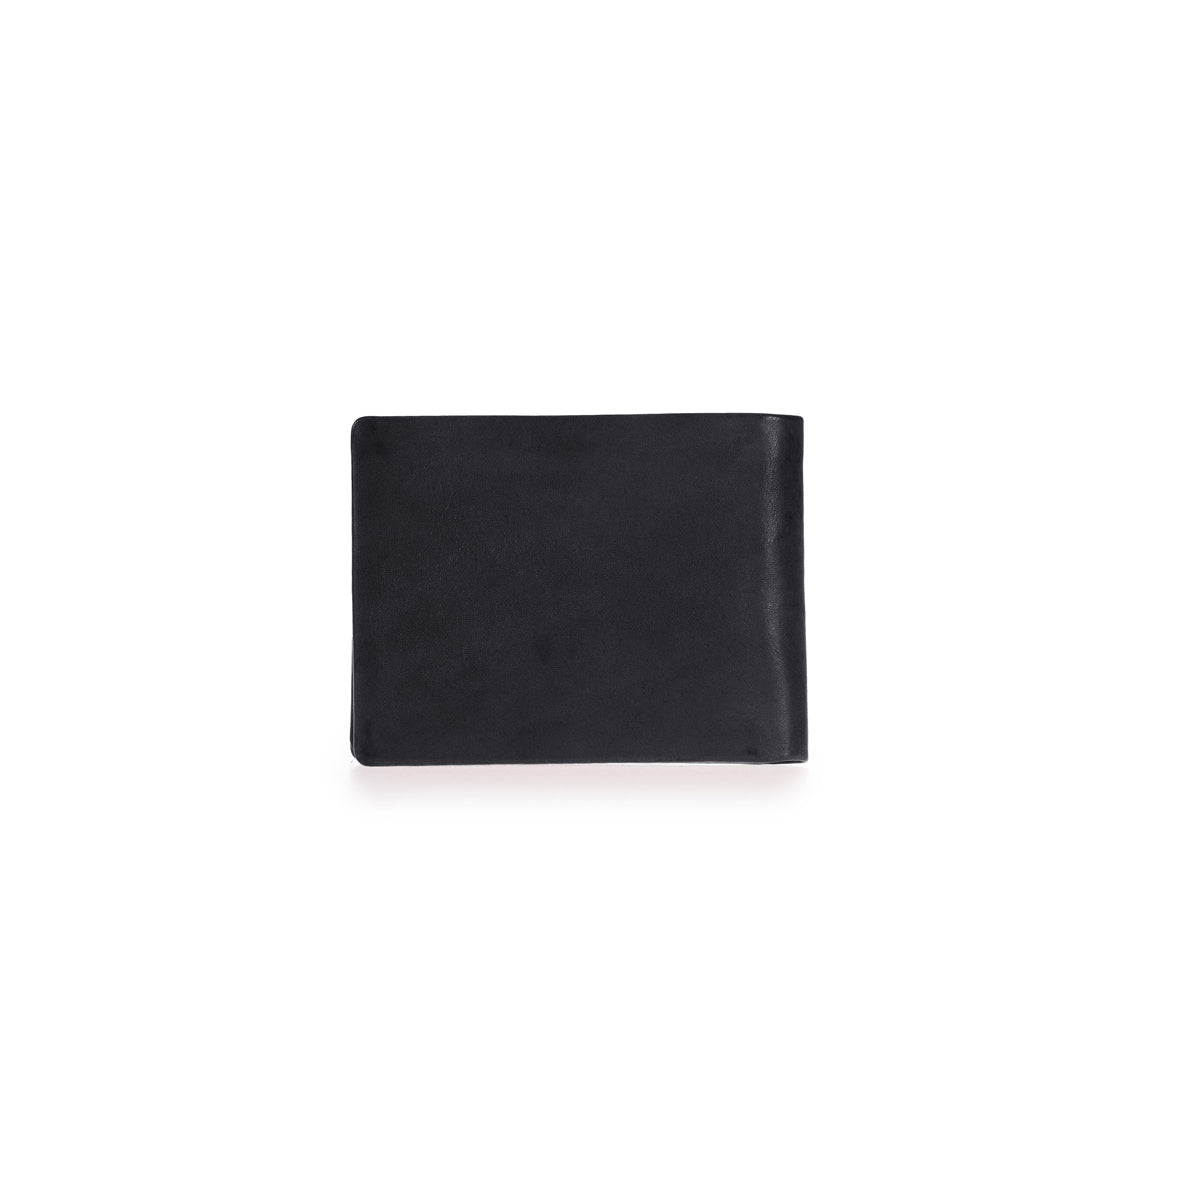 O MY BAG Joshua‘s Wallet Black Classic Leather